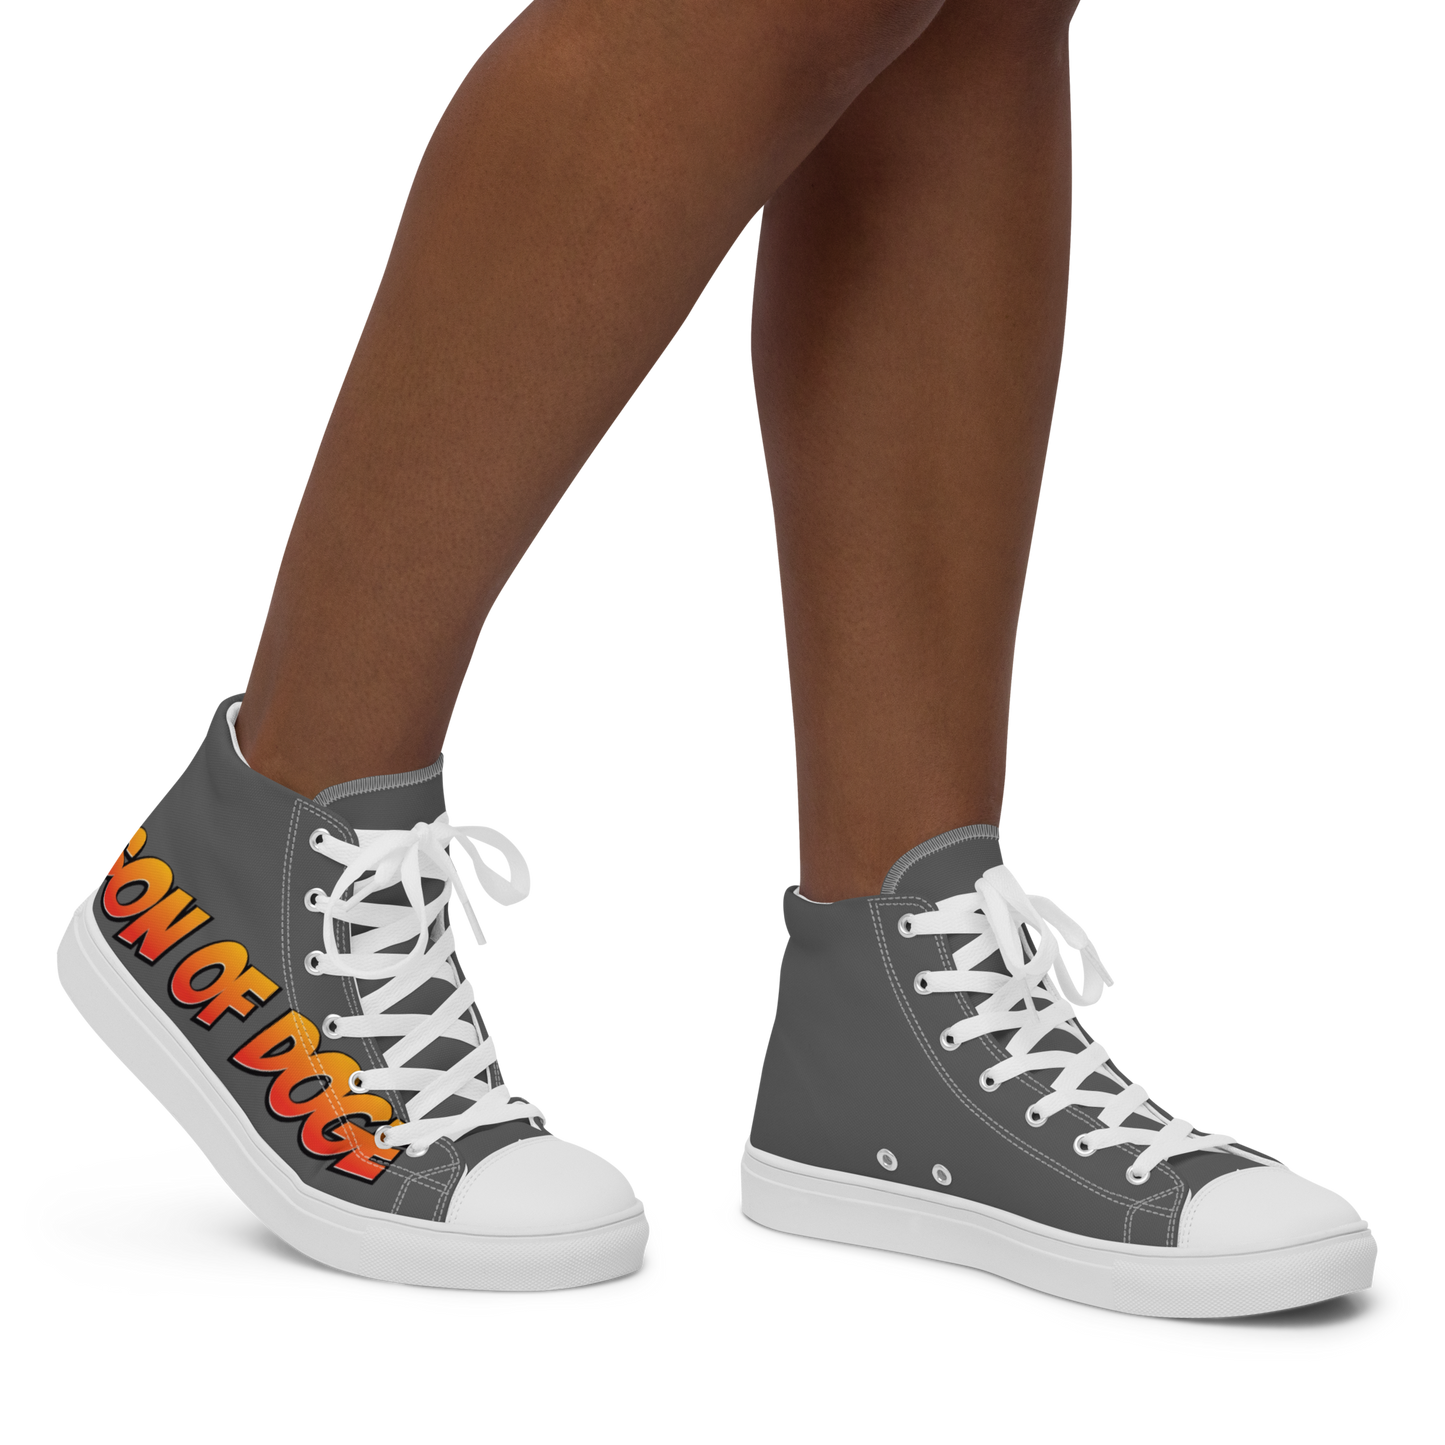 Son Of Doge - Women’s high top canvas shoes (Grey)